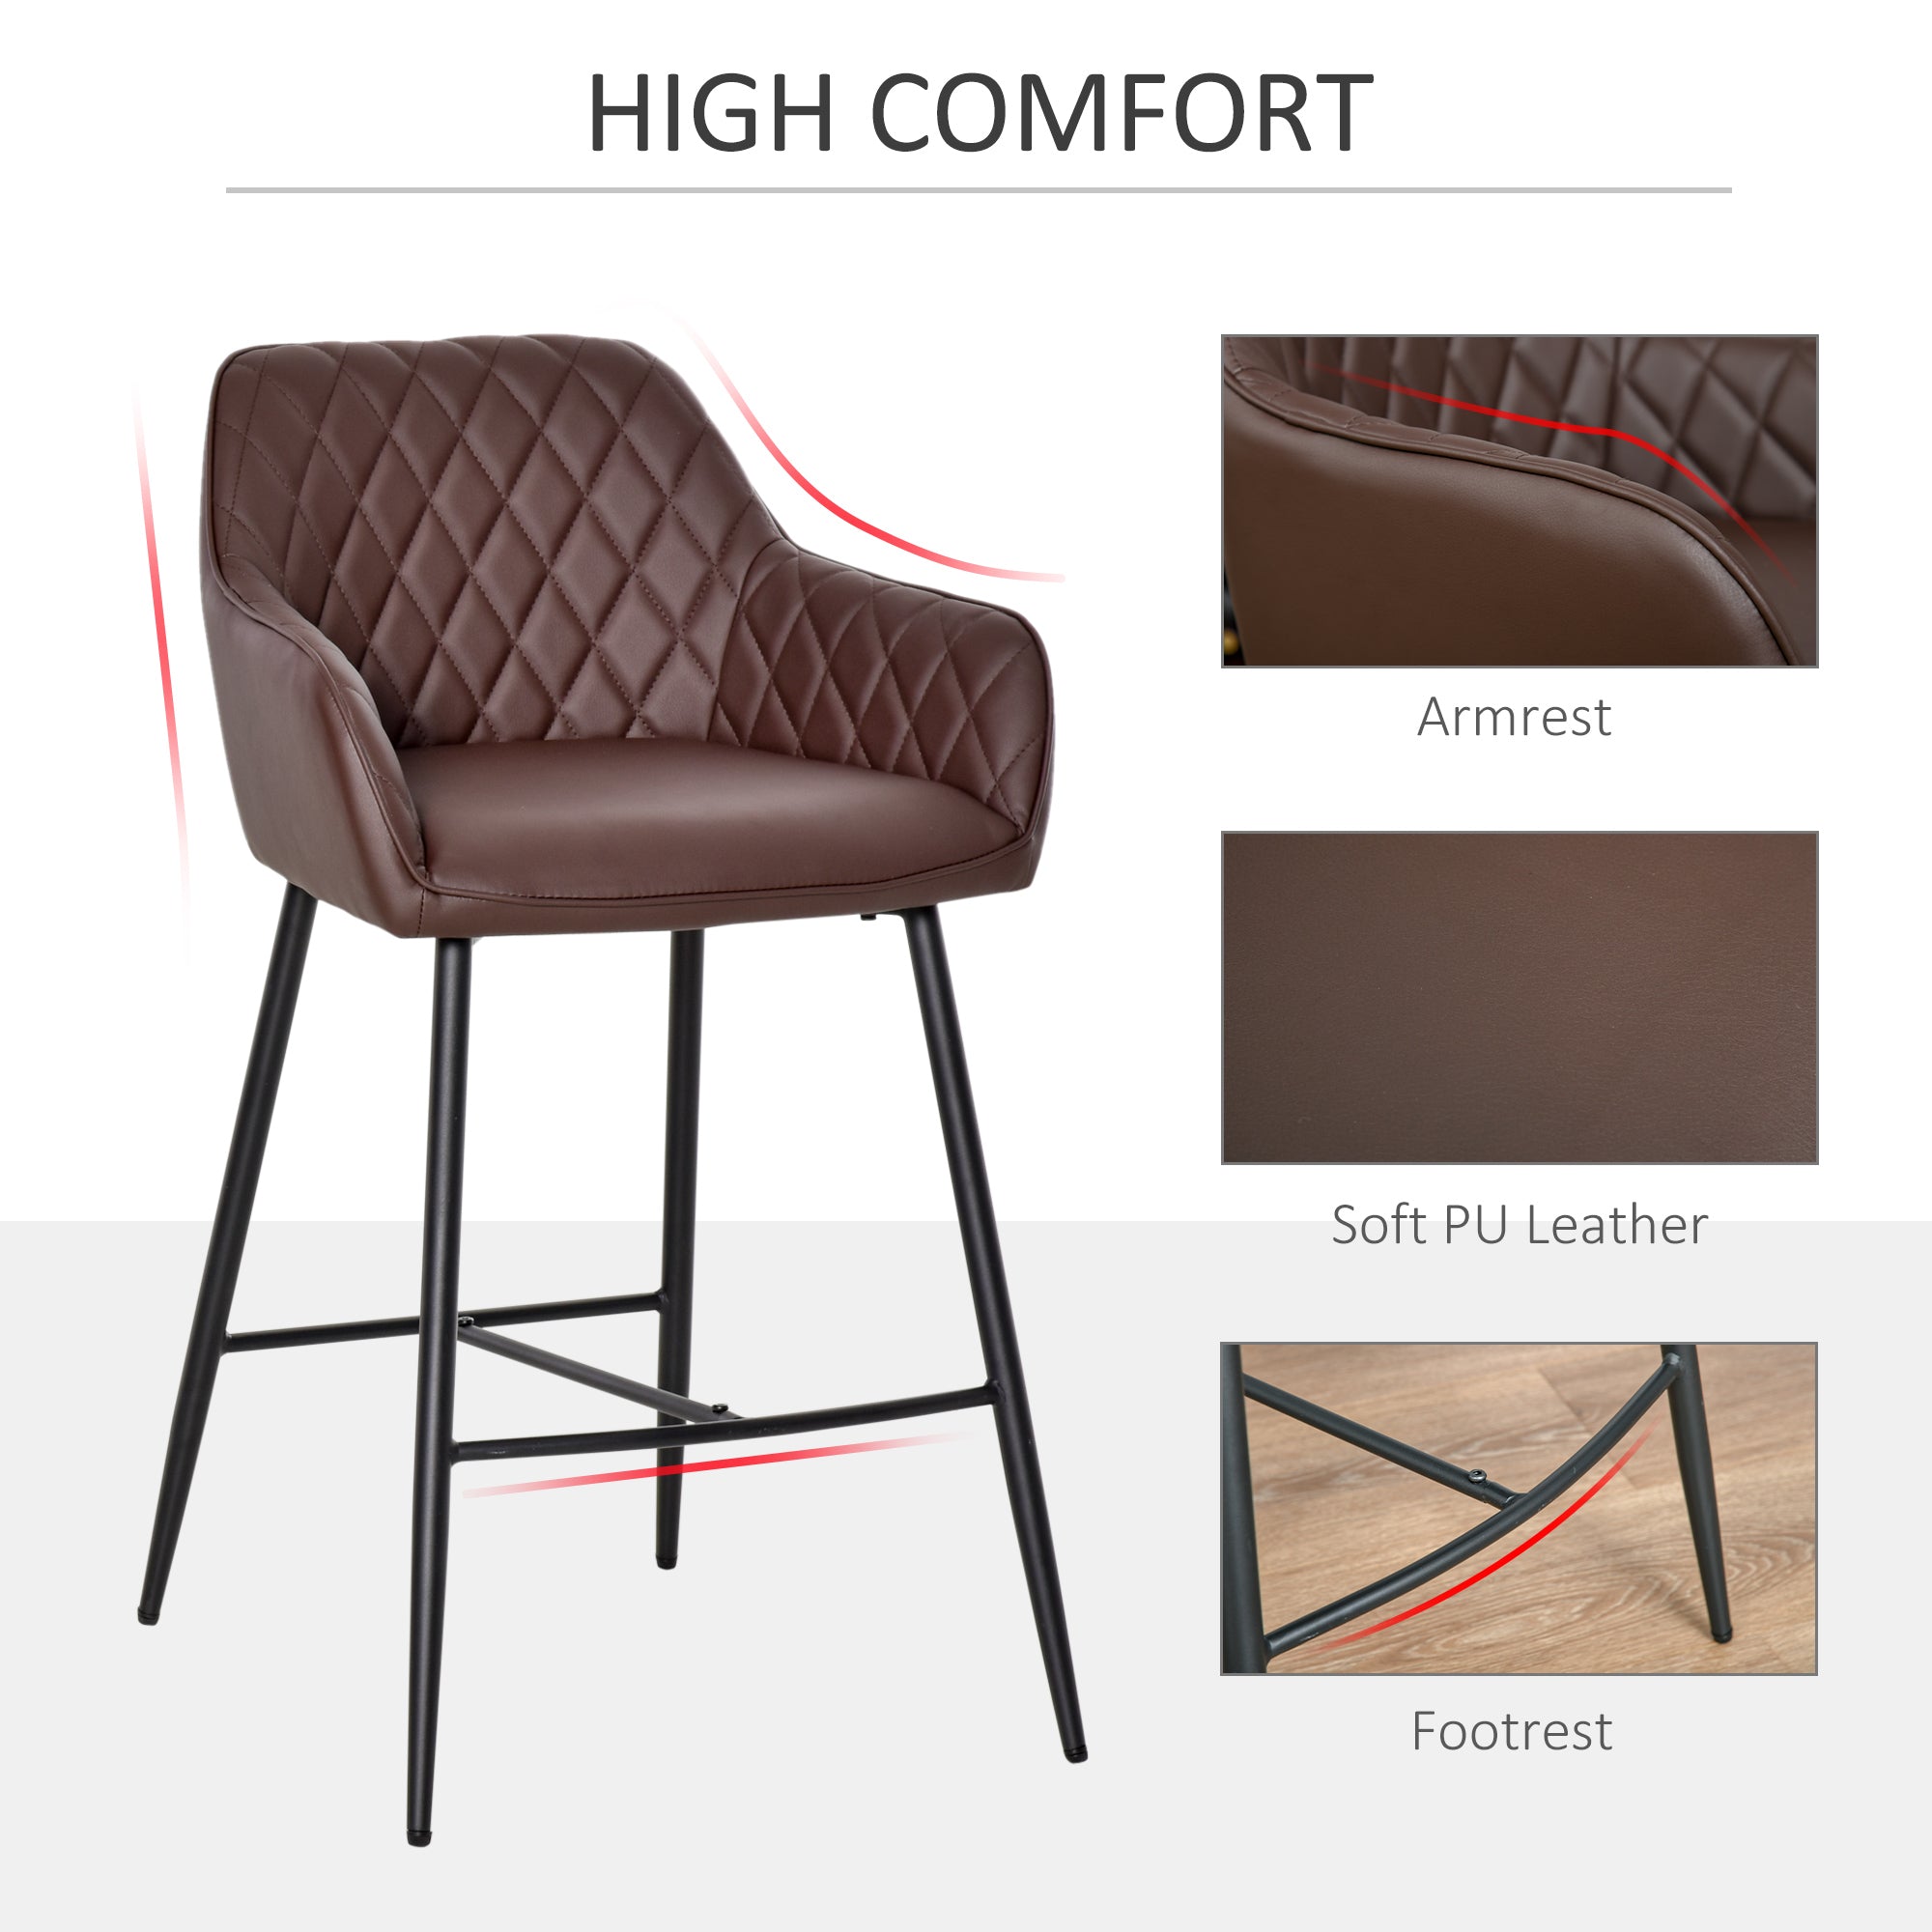 Set of 2 Bar stools With Backs Retro PU Leather Bar Chairs w/ Footrest Metal Frame Comfort Support Stylish Dining Seating Home Brown  AOSOM   